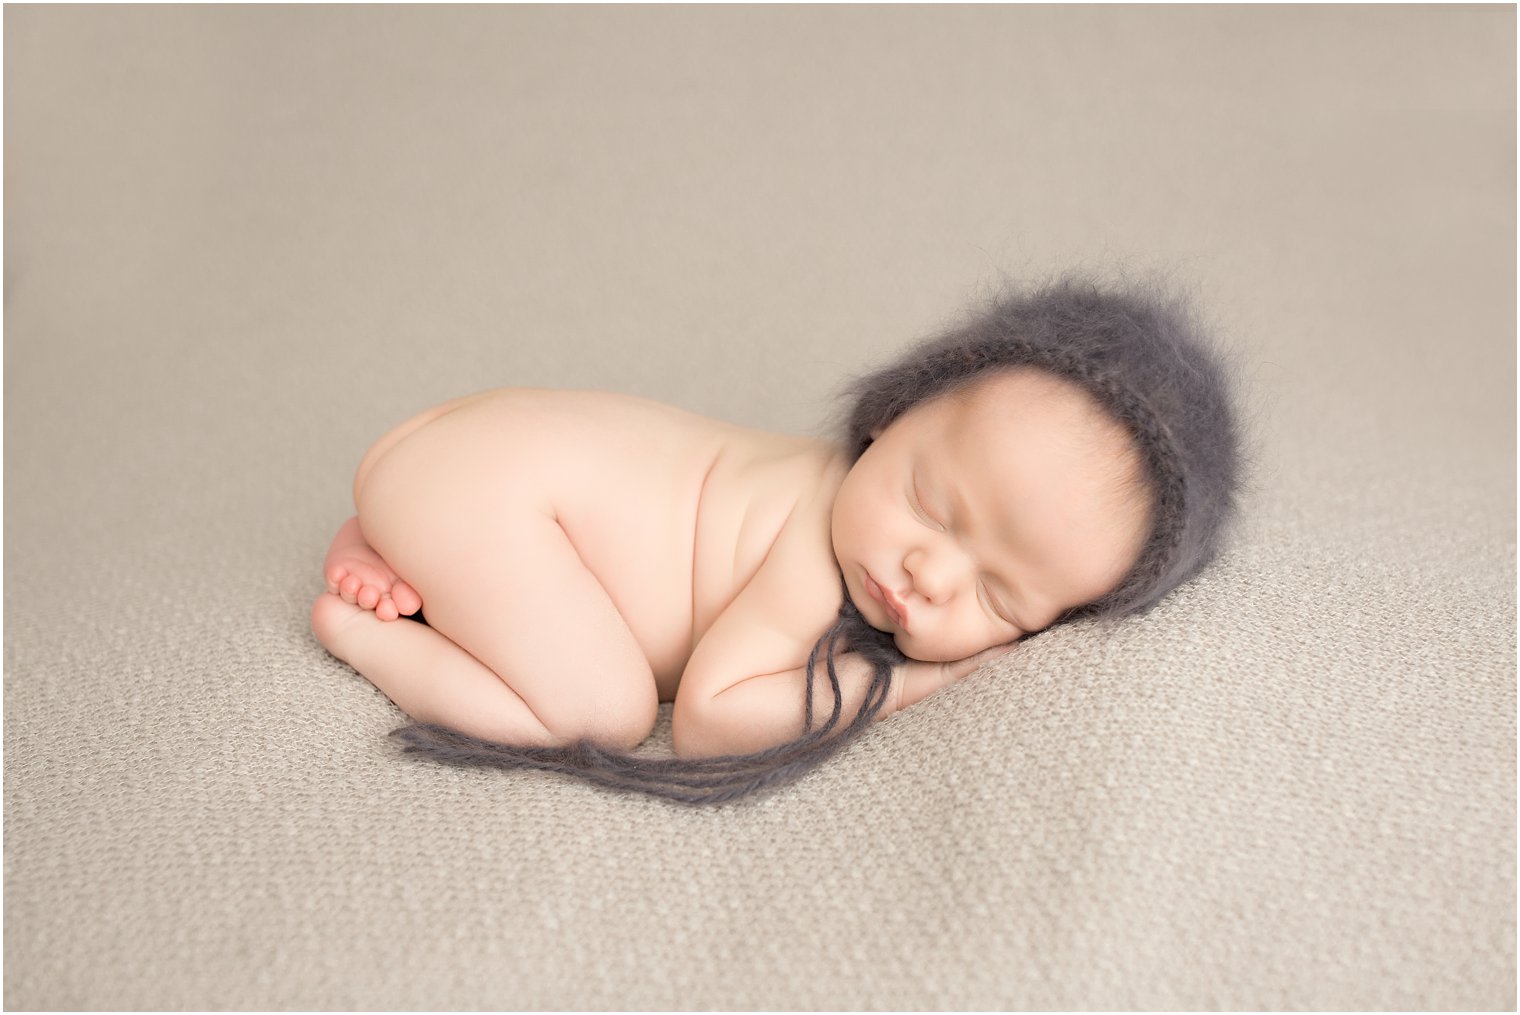 Newborn boy in tushie up pose and fuzzy hat